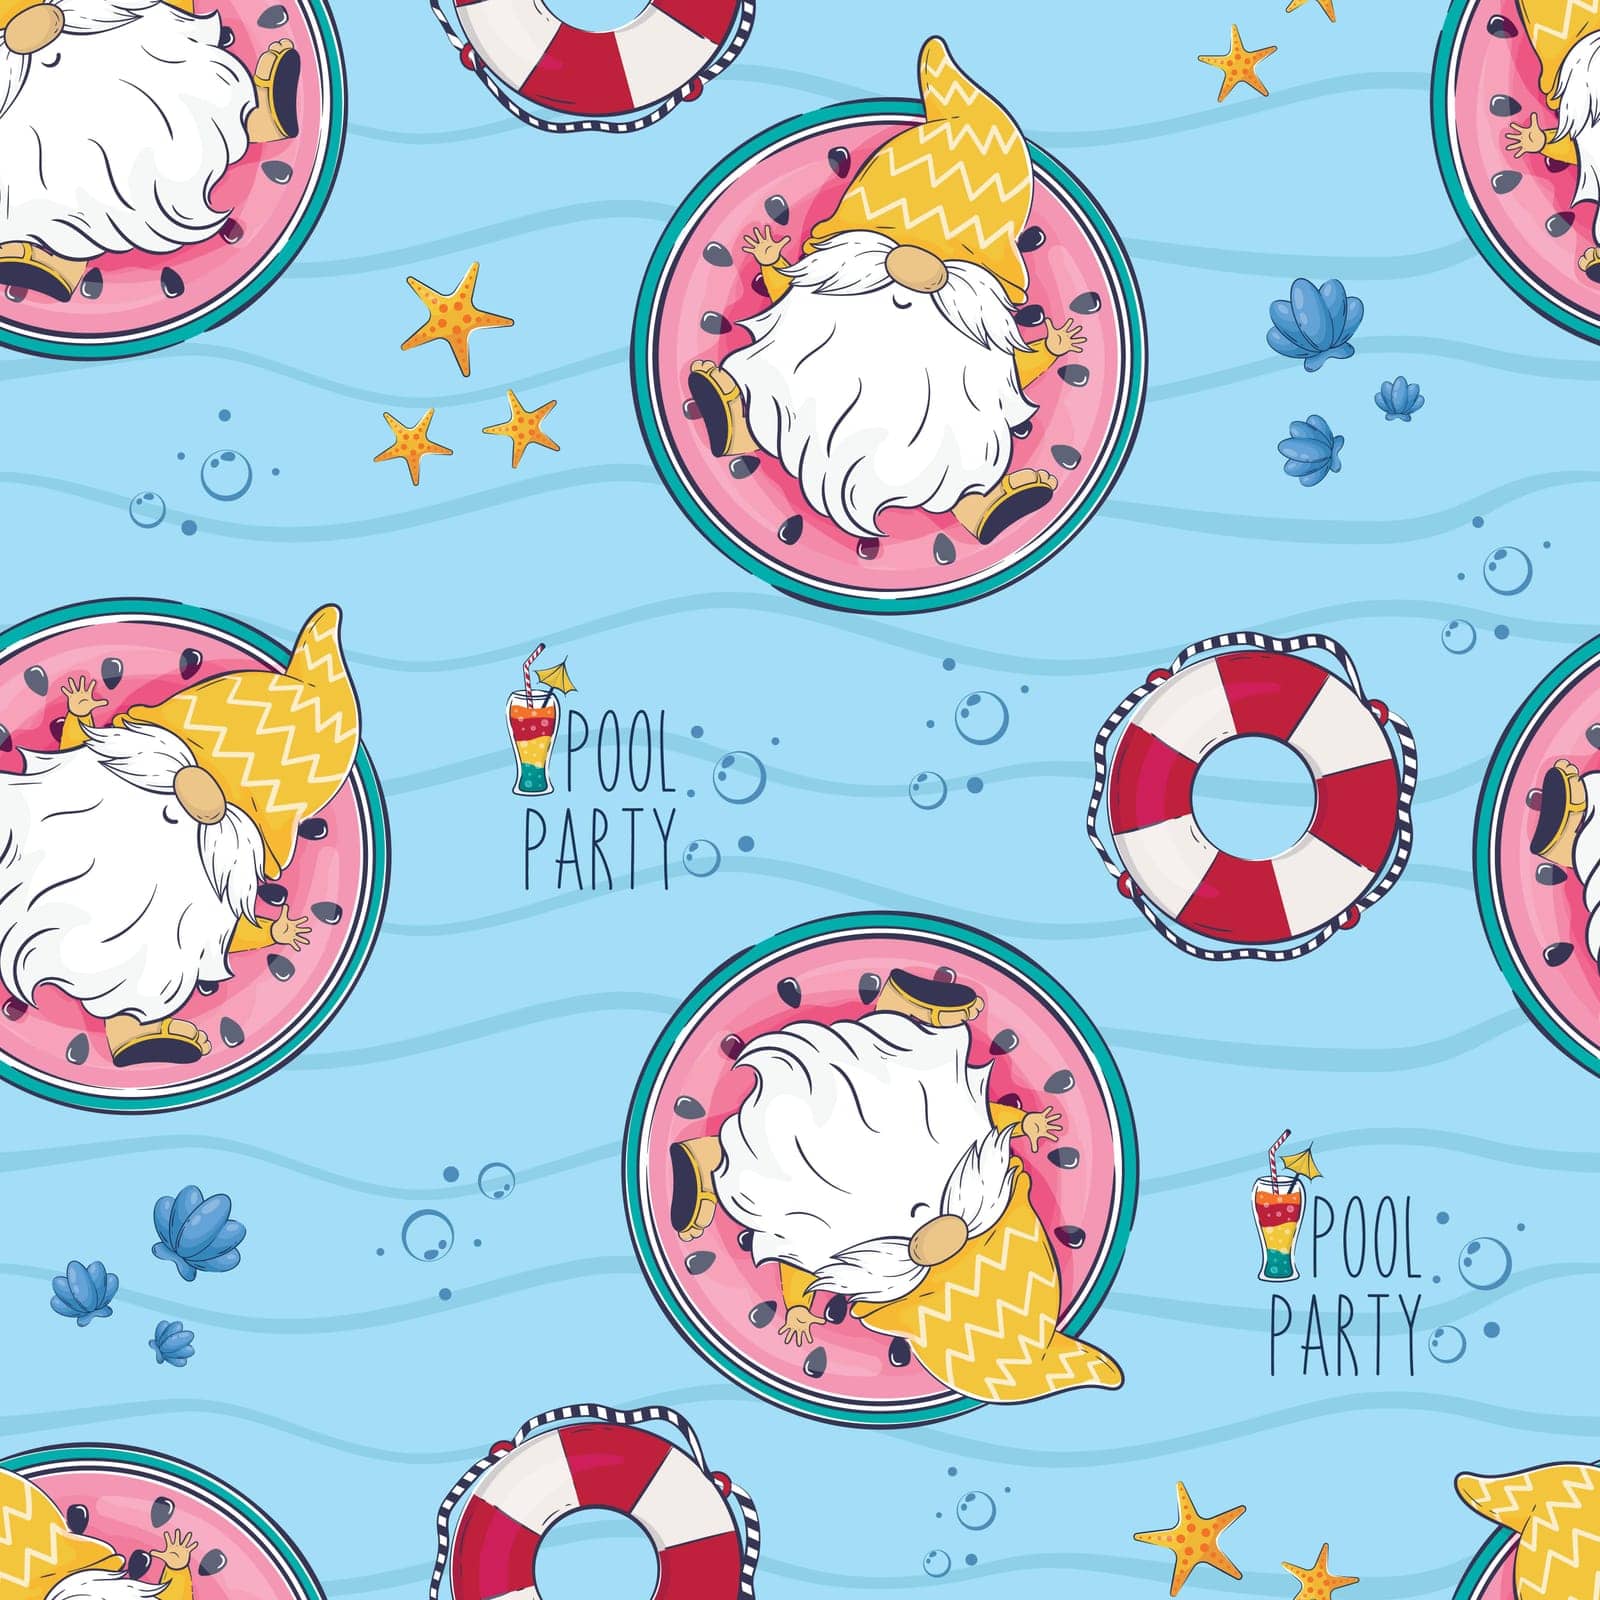 Seamless pattern with cartoon gnome on a watermelon mattress in the pool. Pool party vector background